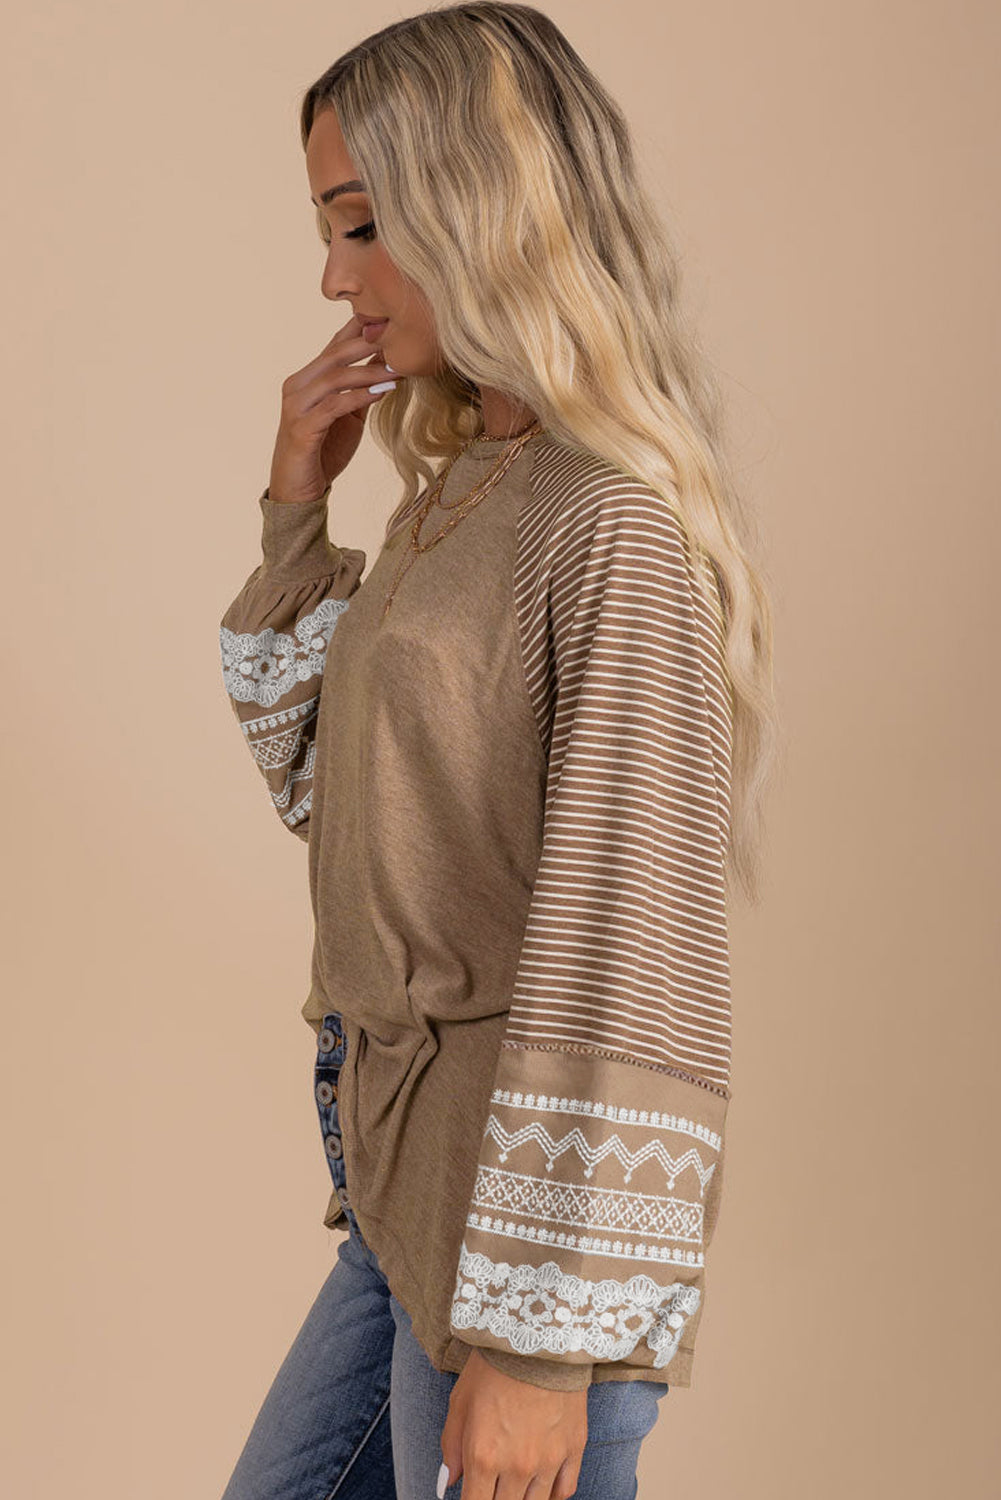 Light French Beige Floral Striped Patchwork Loose Long Sleeve Top